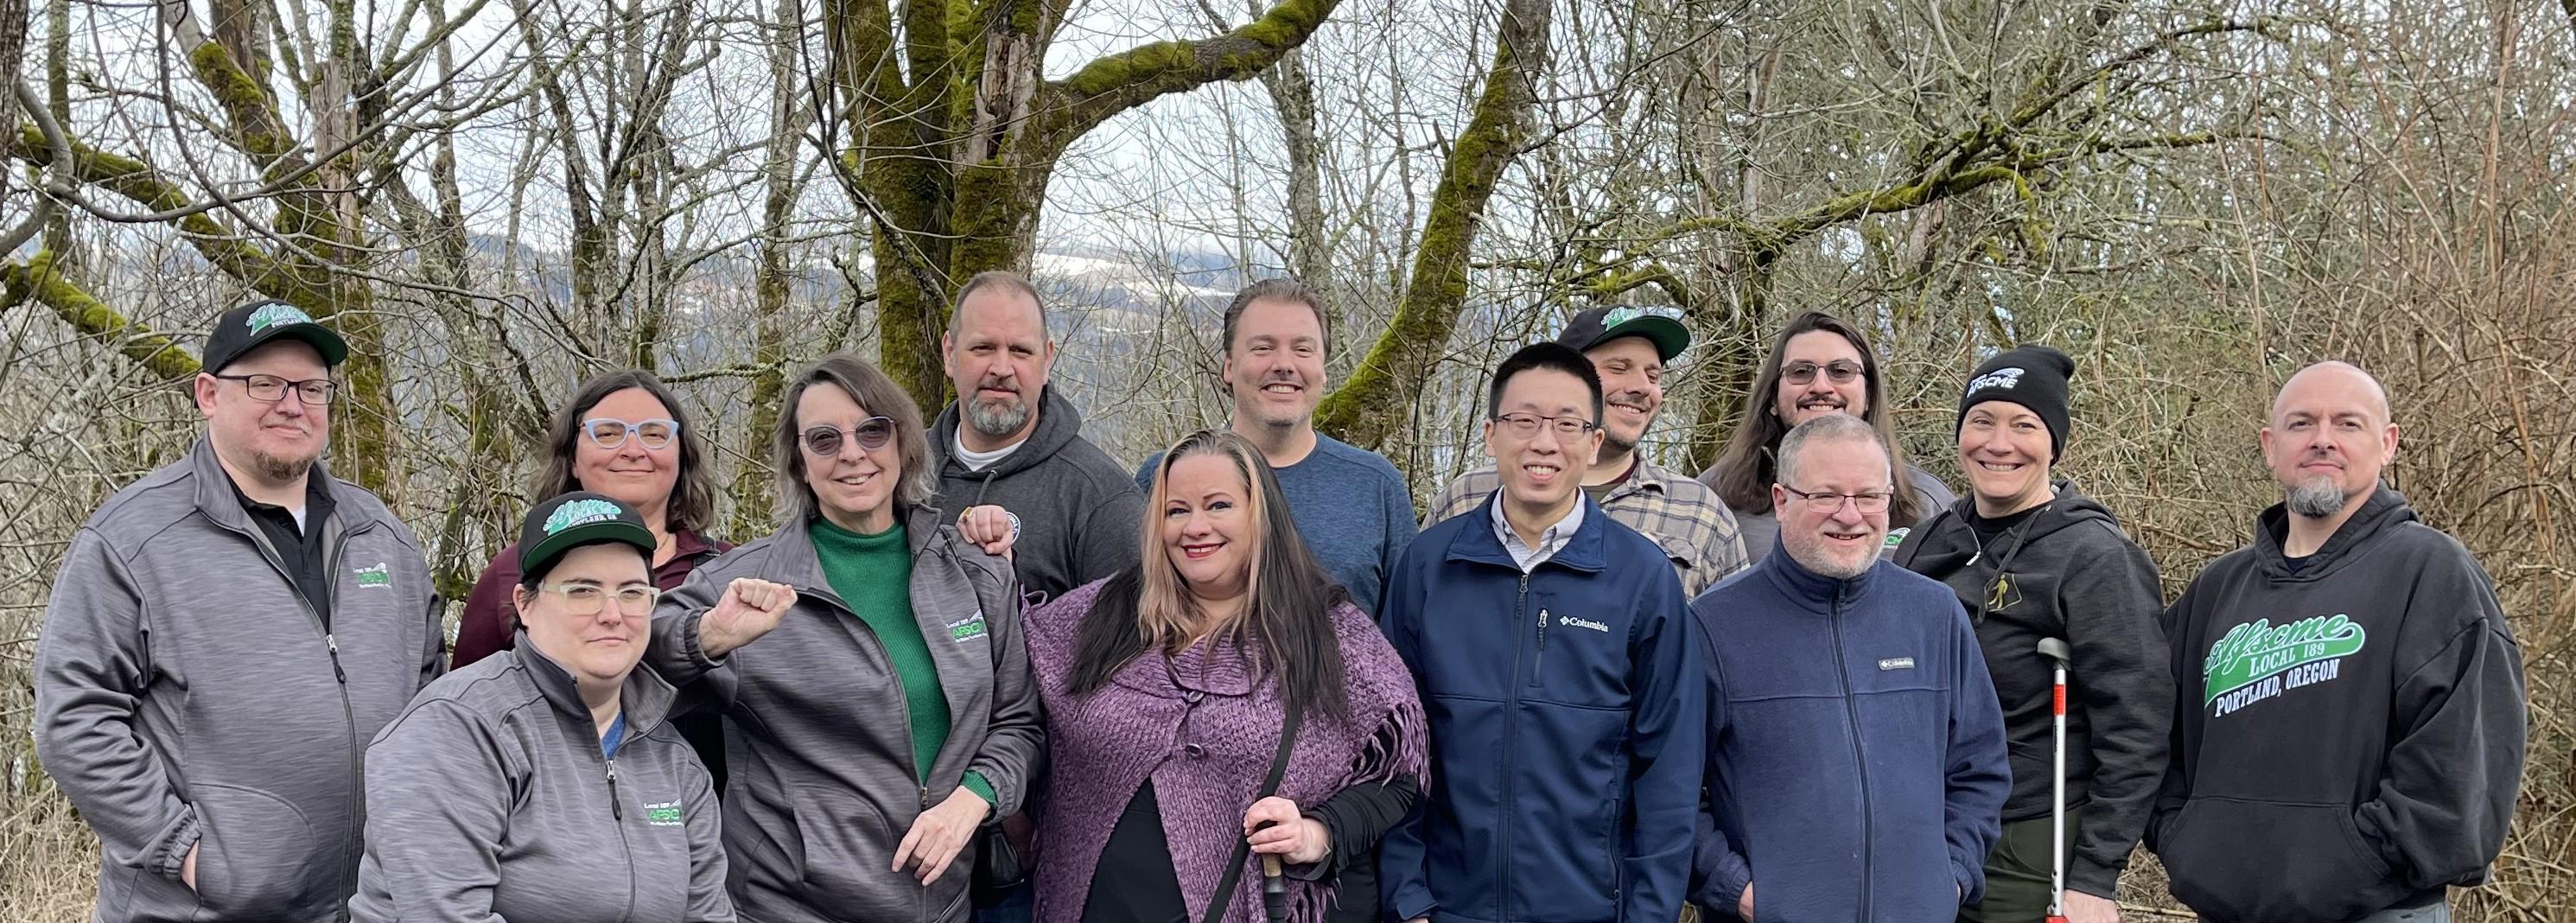 An image of several folks standing together against a scenic backdrop. Left to right: Dan, Chris F, Courtney, JoAnn, Rob, Amie, Chris R, Minh Dan, Alex, Jacob (foreground), Kelly, Tara, Chris P